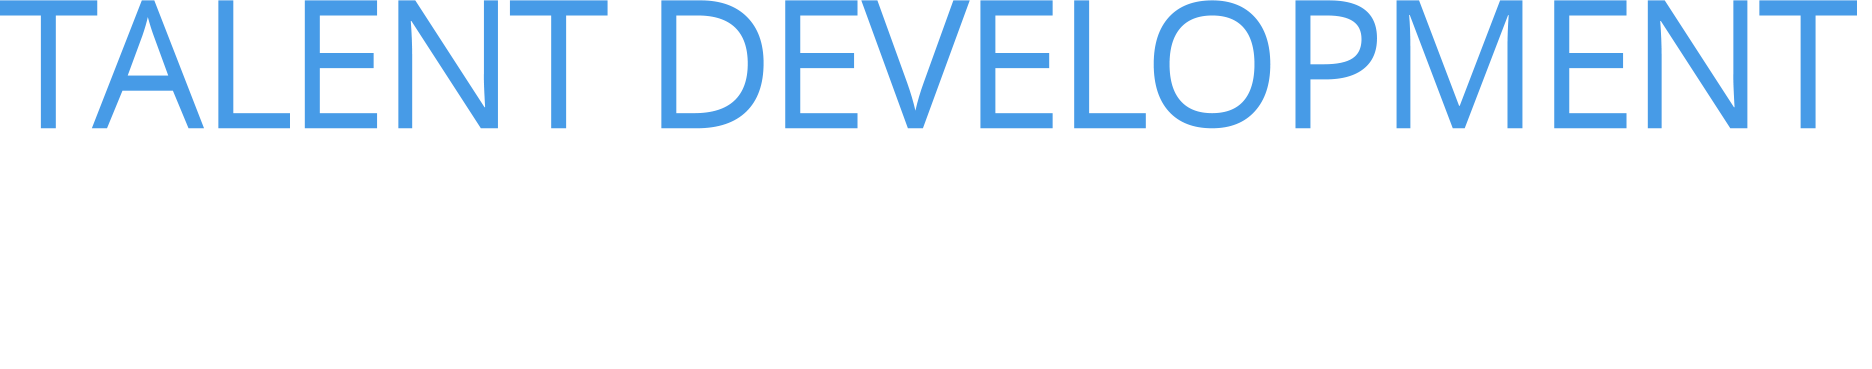 Talent Development Think Tank - connect, grow, accelerate your career